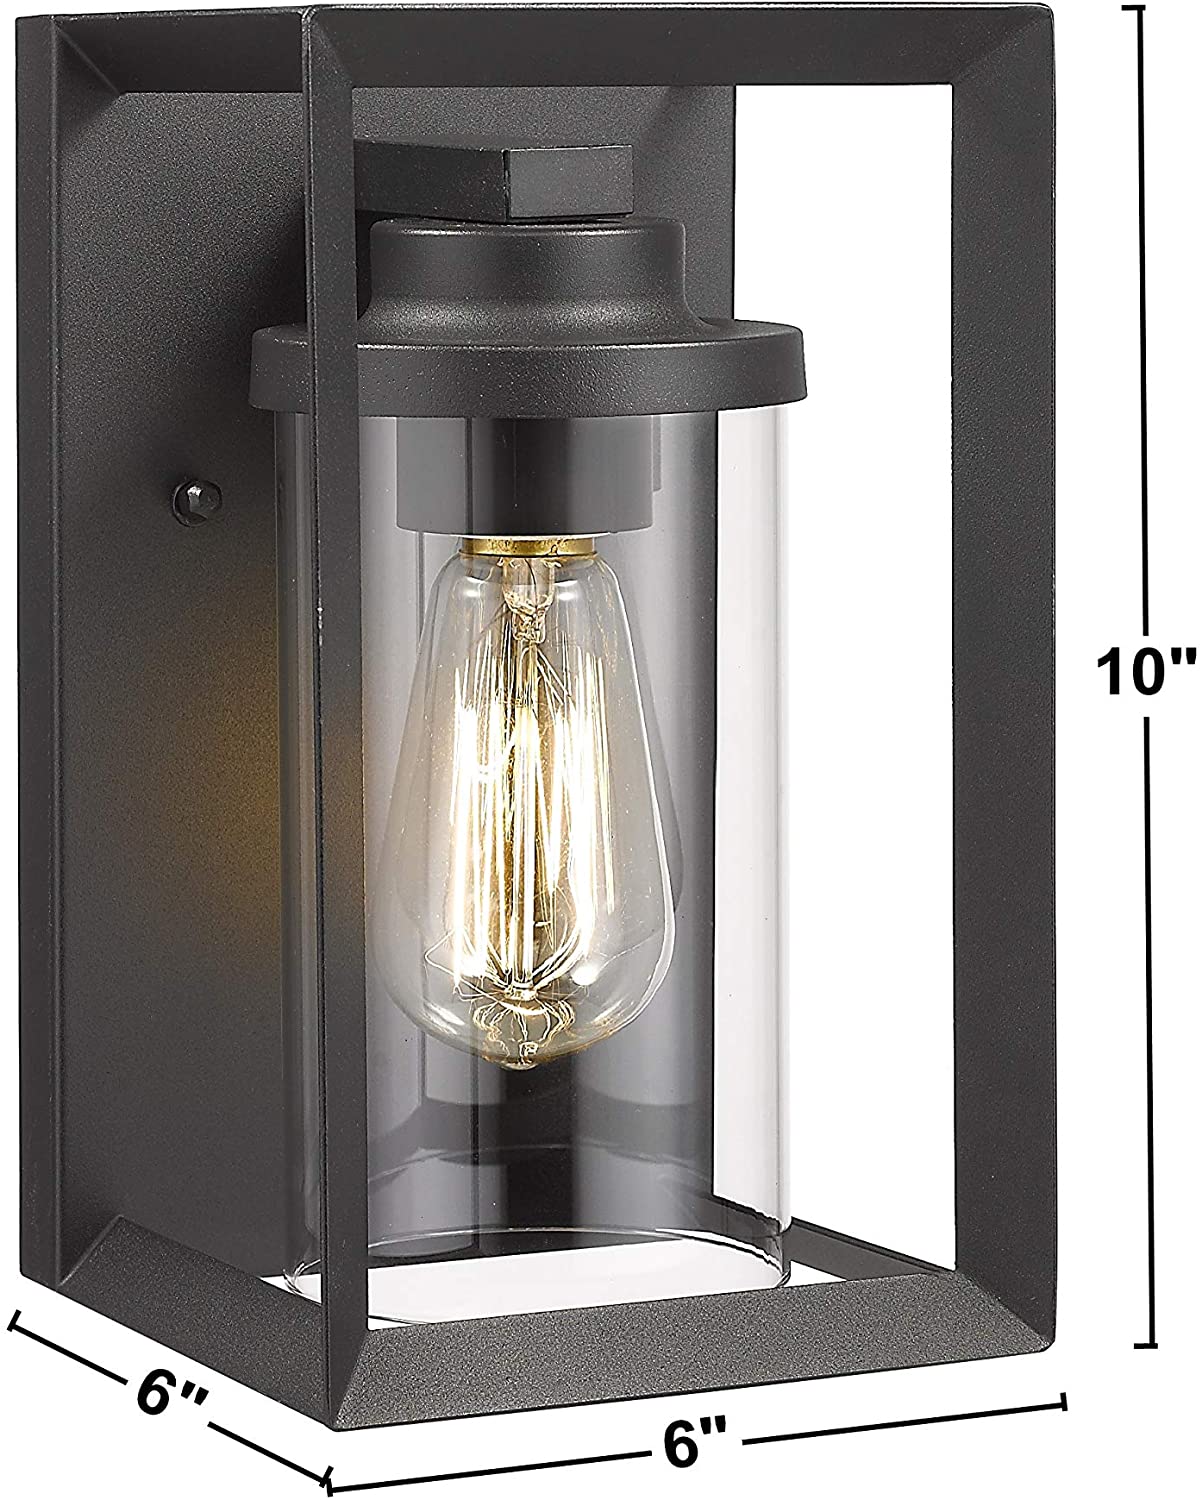 Black wall mount light outdoor exterior wall sconce with glass shade